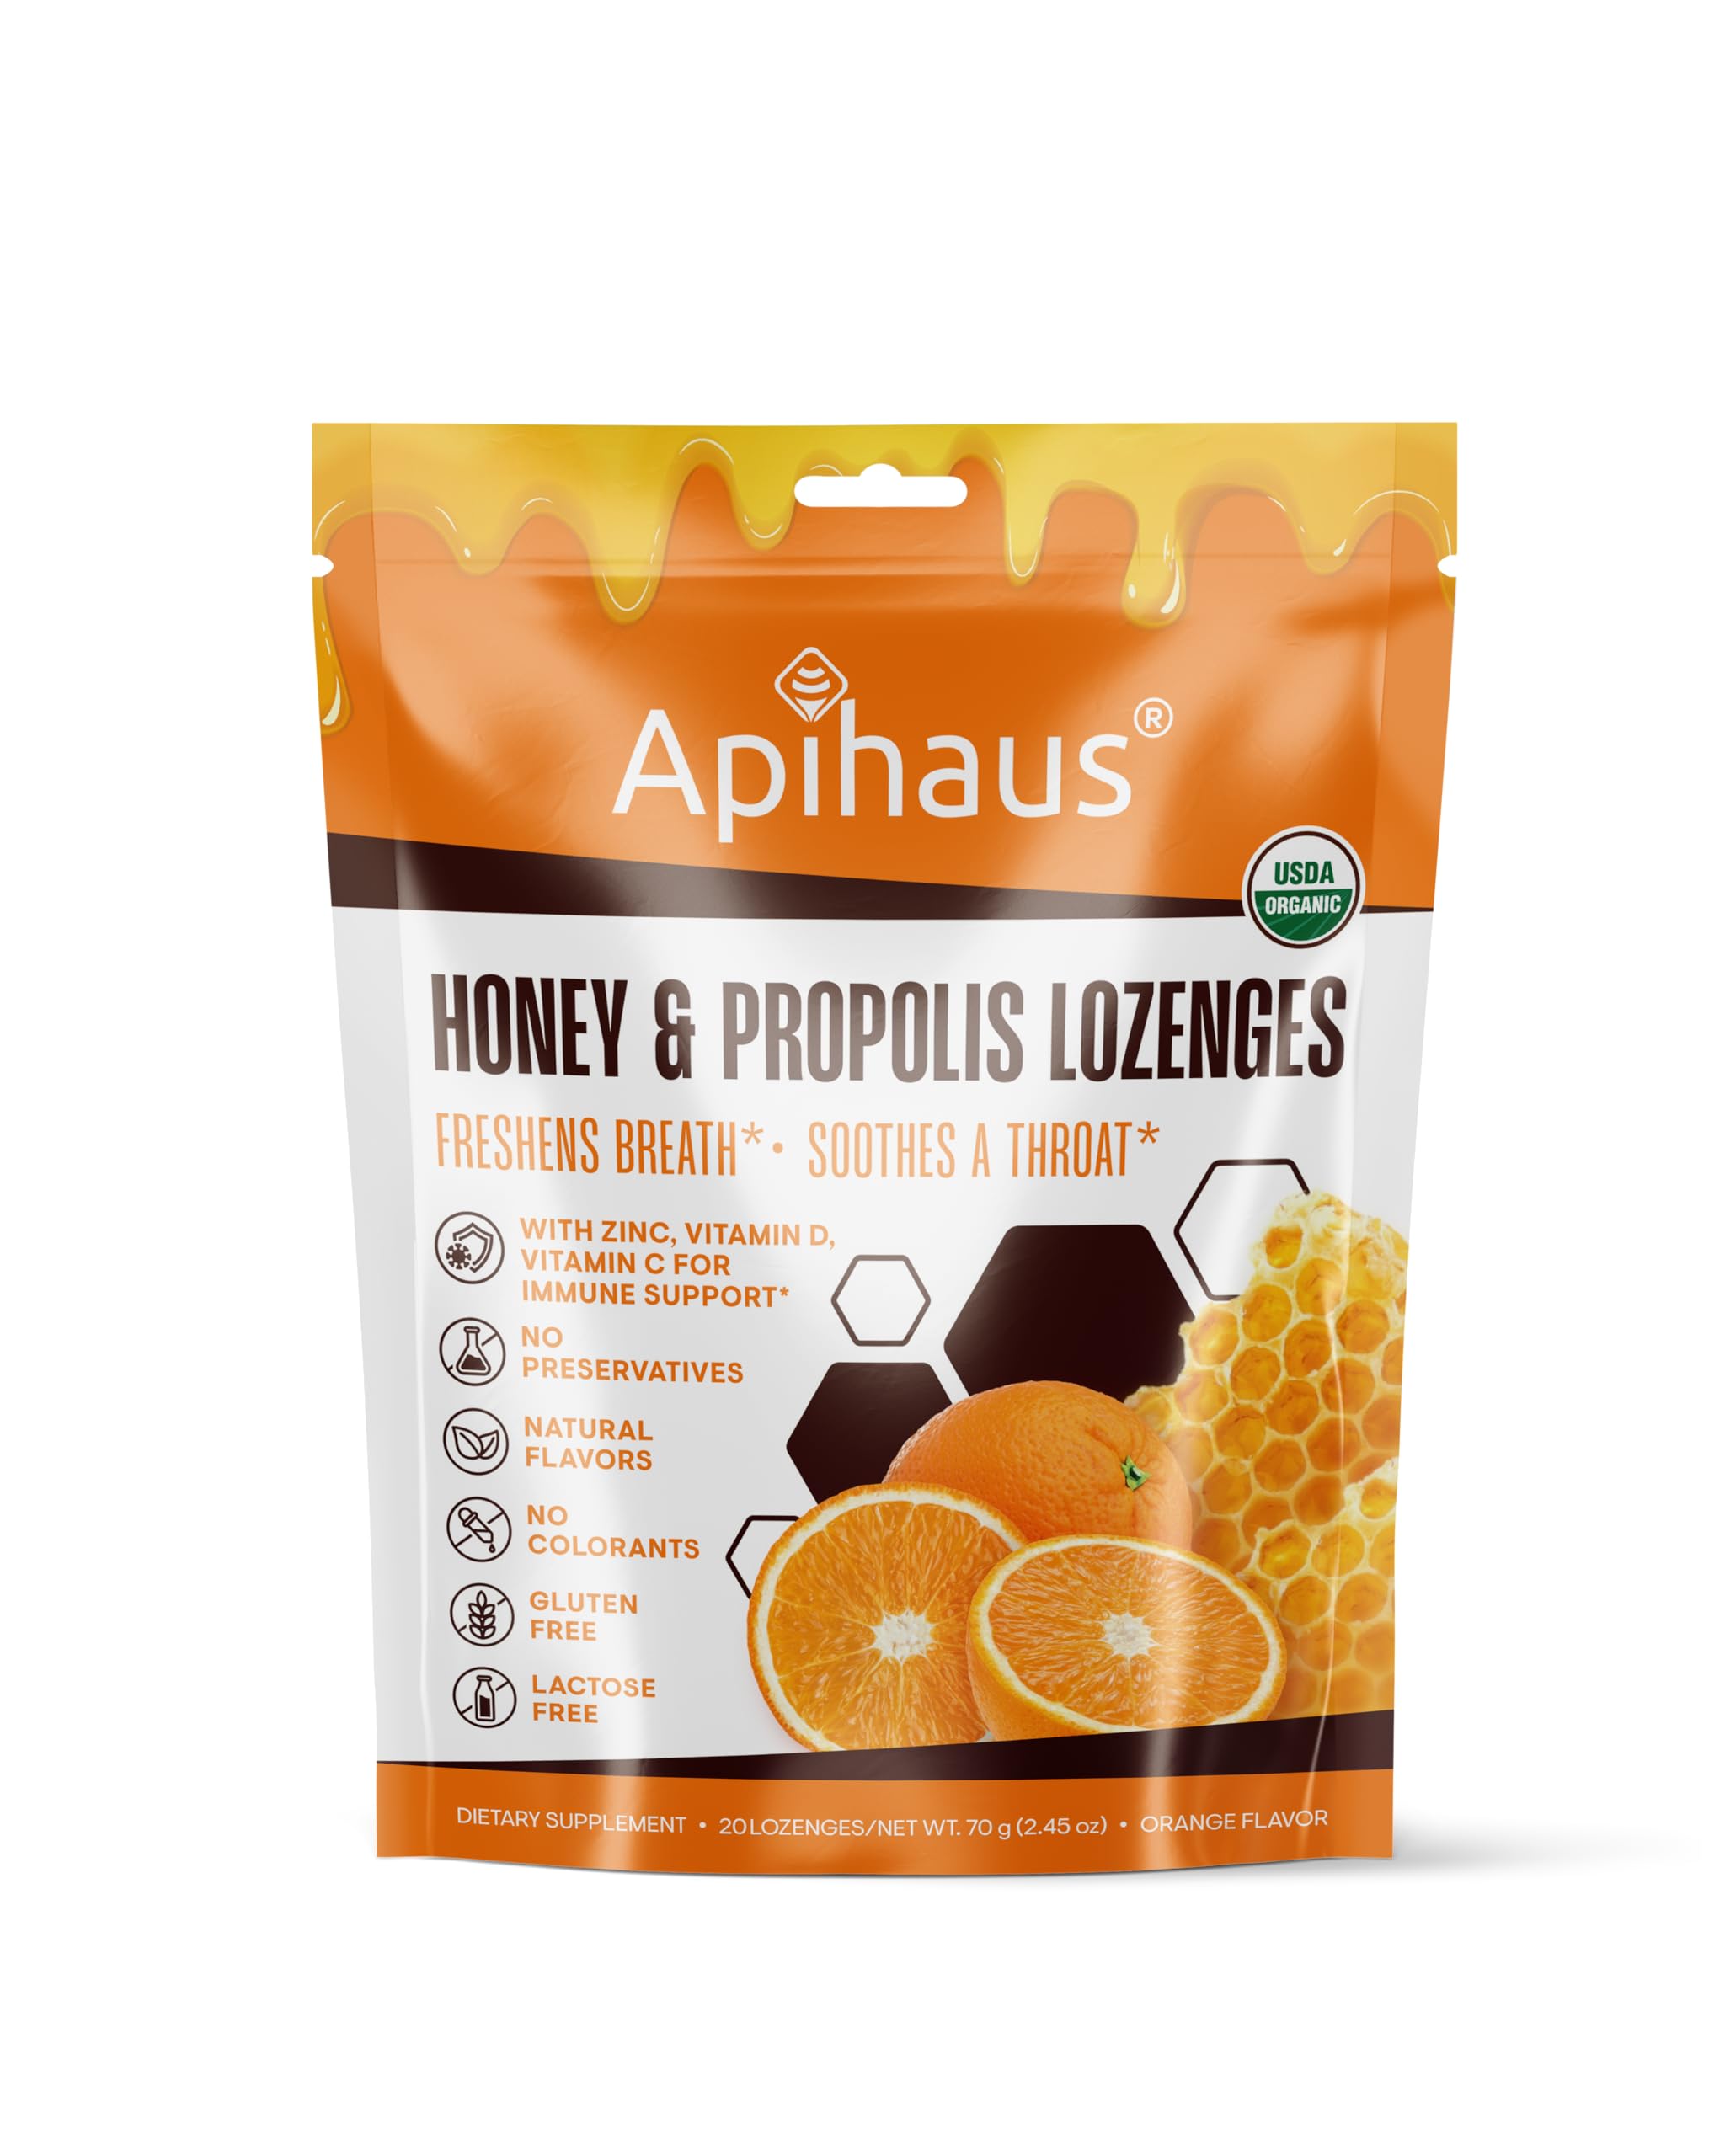 apihaus Honey and Propolis Lozenges Orange Flavor, Freshens Breath - Soothes a Throat- Immune Support with Vitamin C, Vitamin D and Zinc, 20 Count